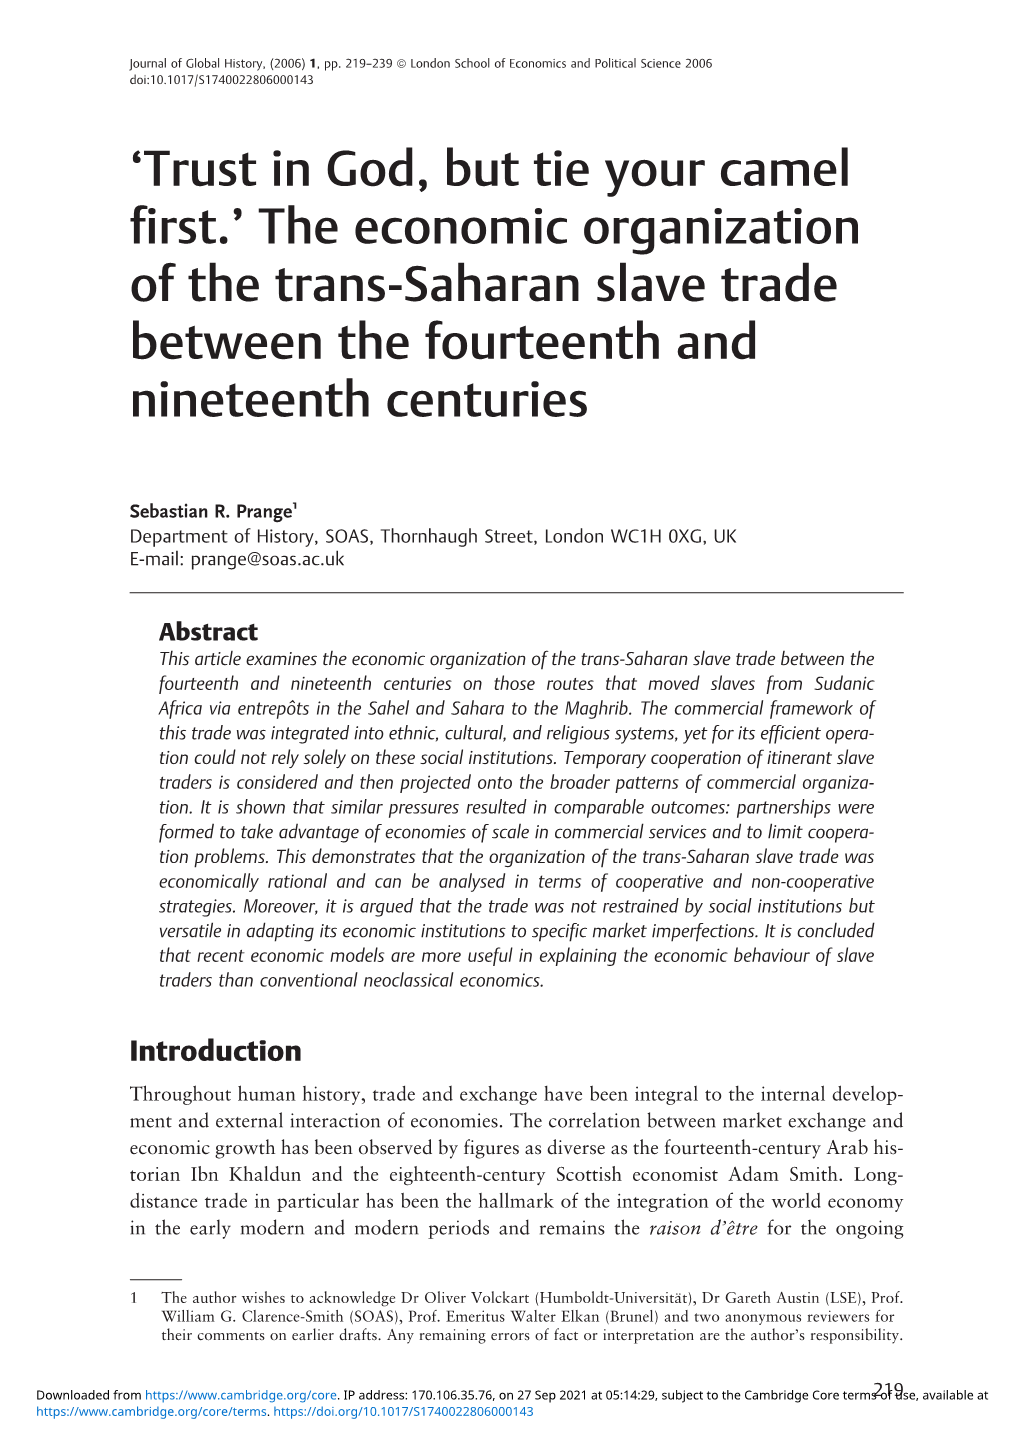 The Economic Organization of the Trans-Saharan Slave Trade Between the Fourteenth and Nineteenth Centuries